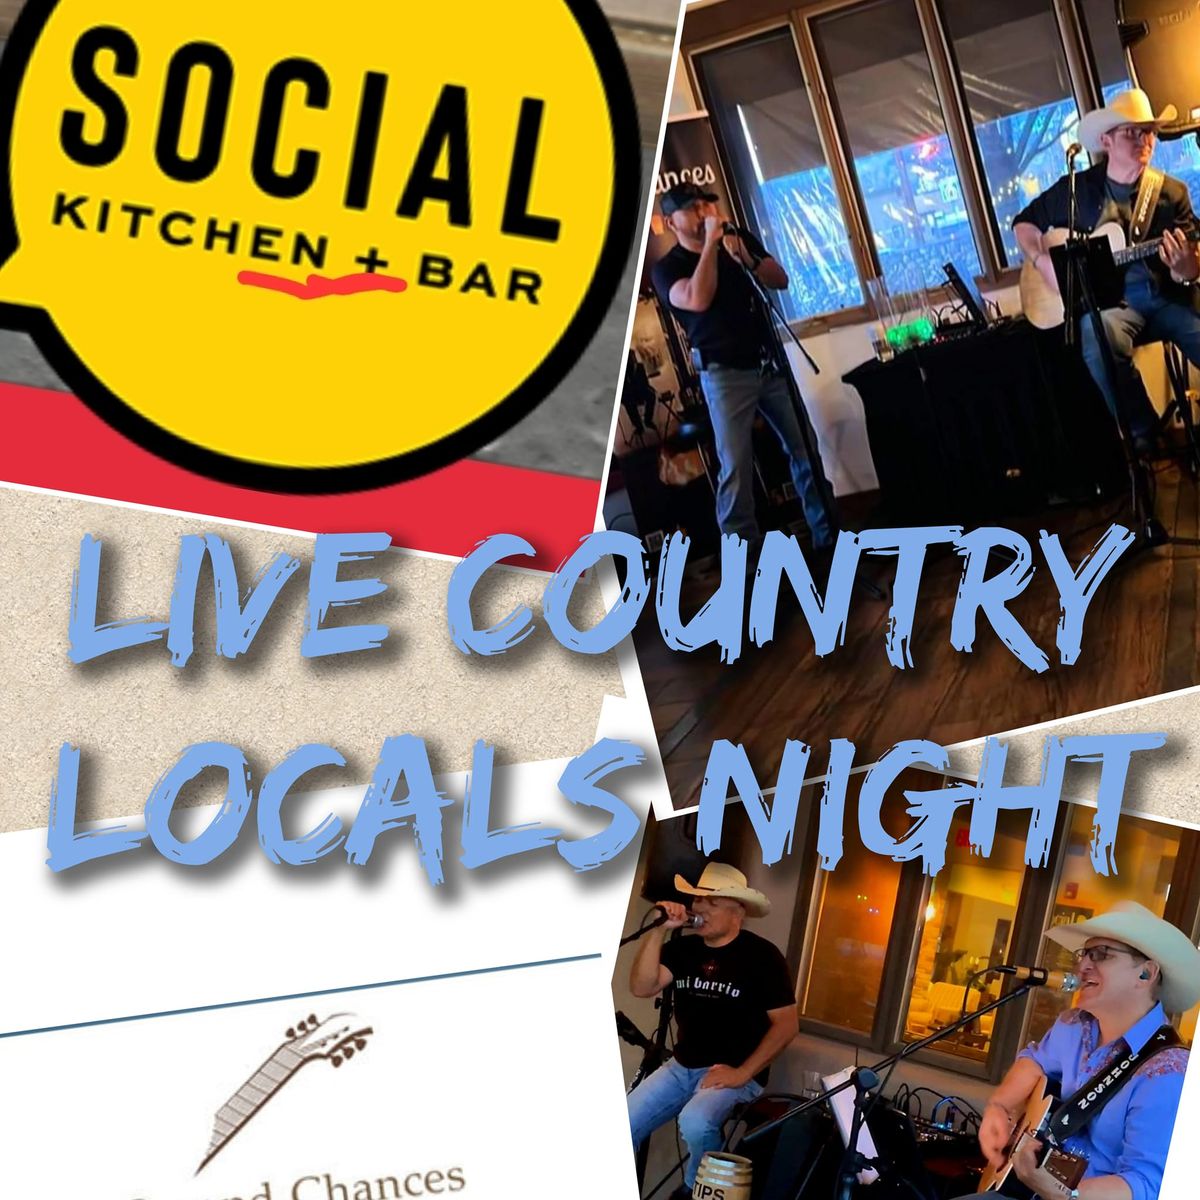 Live County Music at The Social Kitchen & Bar 